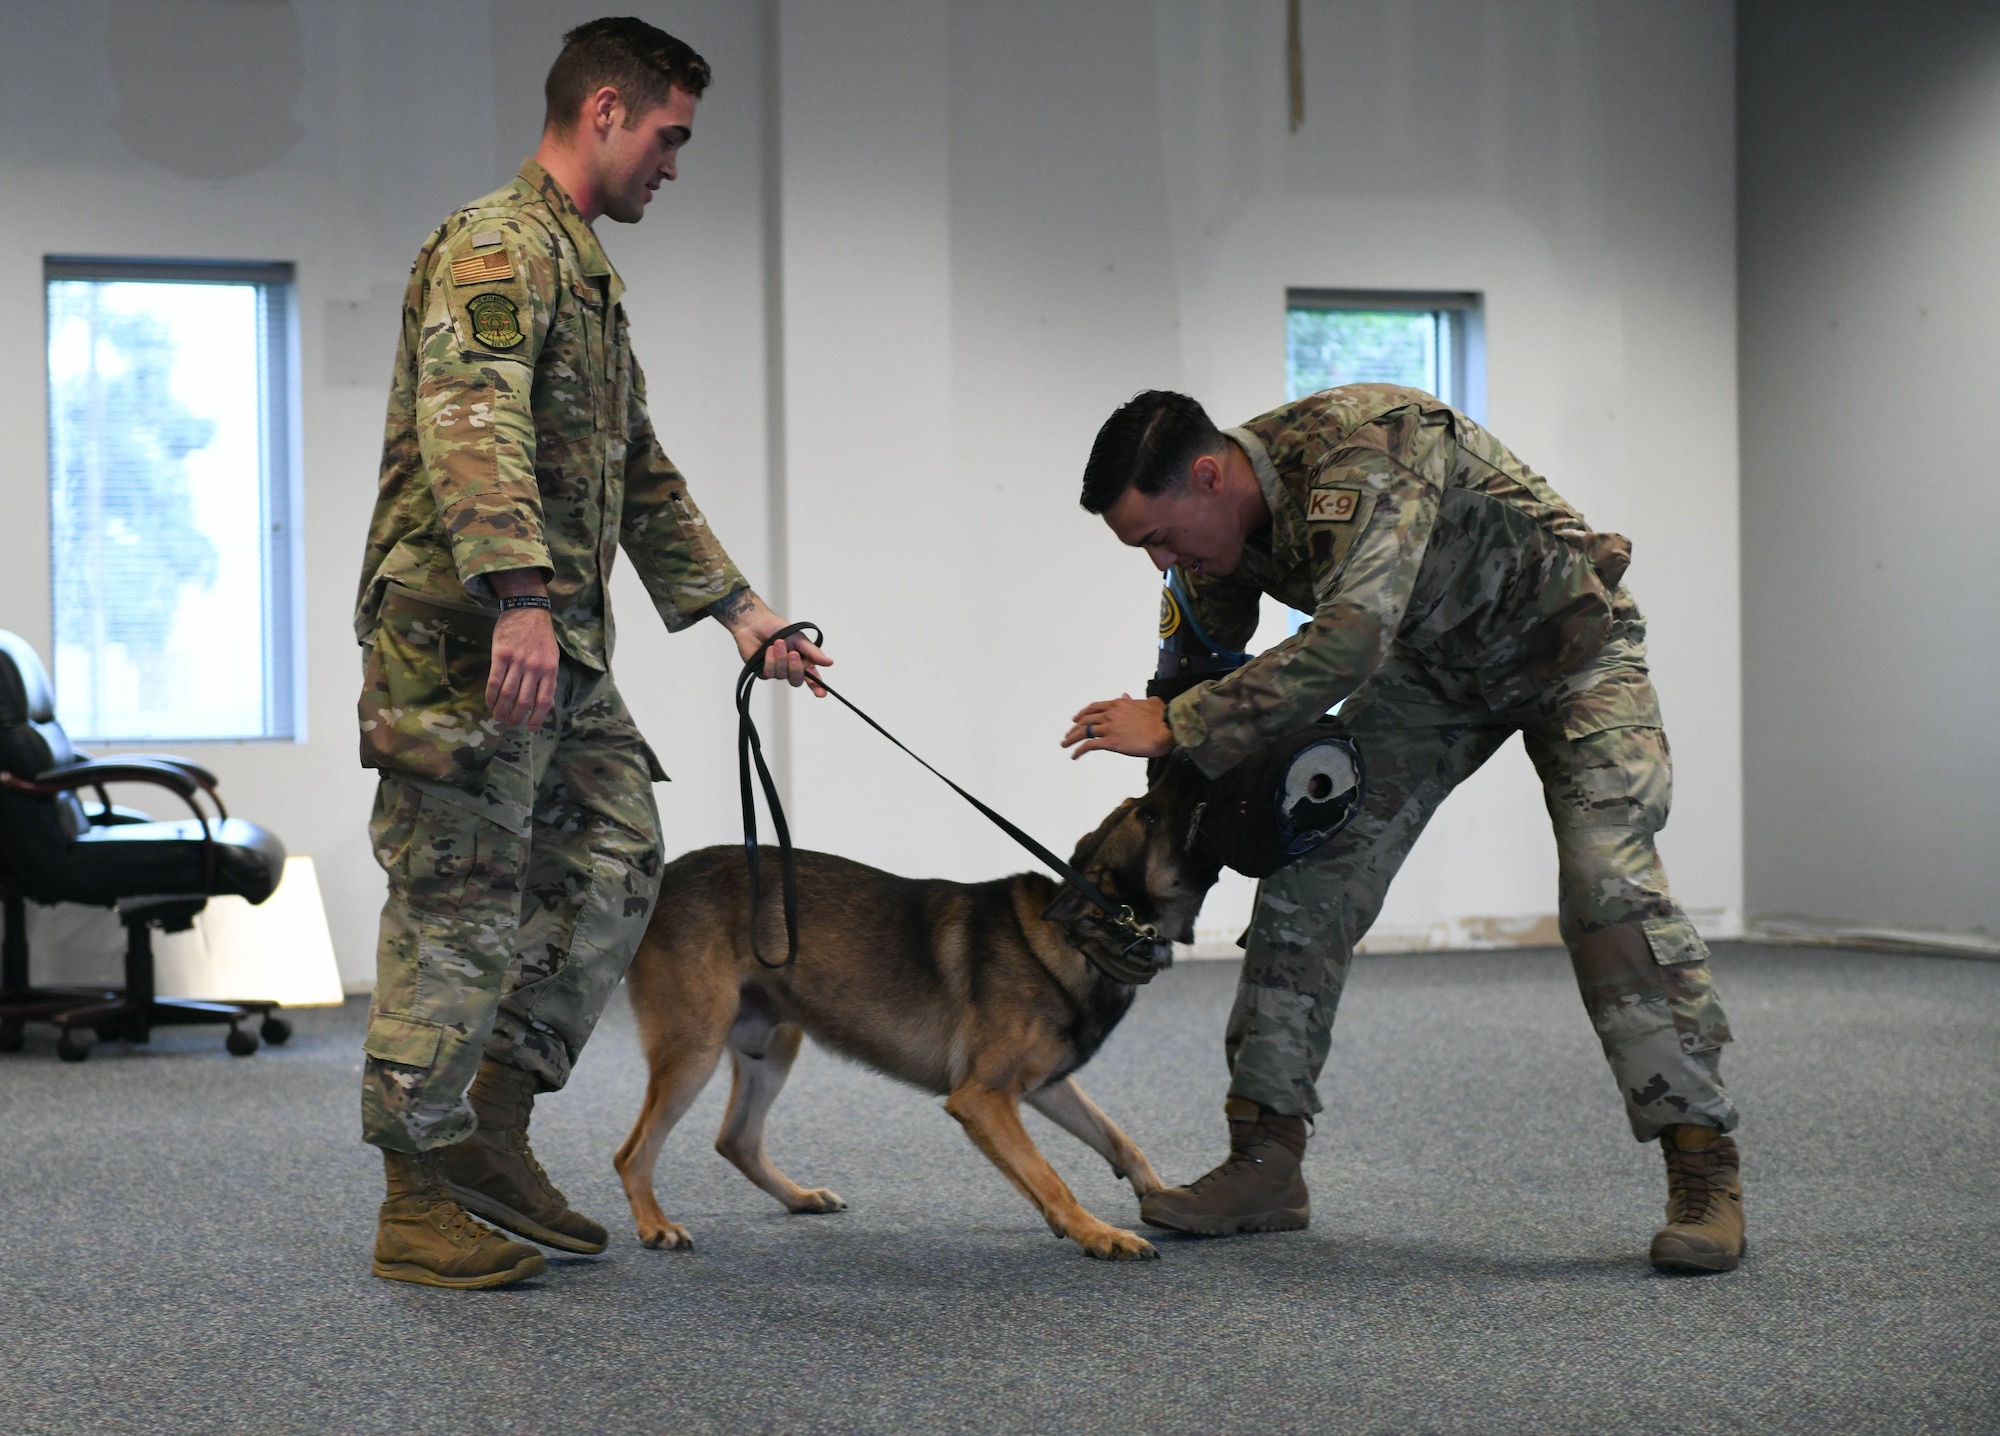 U.S. Air Force Senior Airman Spencer Harwood (left) and Staff Sgt. Matthew Baxter (right), 325th Security Forces Squadron military working dog handlers, conduct a MWD demonstration for Junior Leadership Bay members at Tyndall Air Force Base, Florida, June 22, 2021. JLB toured Tyndall to get a better understanding of the role Tyndall plays in the local community and learn more about Air Force opportunities after high school. (U.S. Air Force photo by Airman 1st Class Anabel Del Valle)